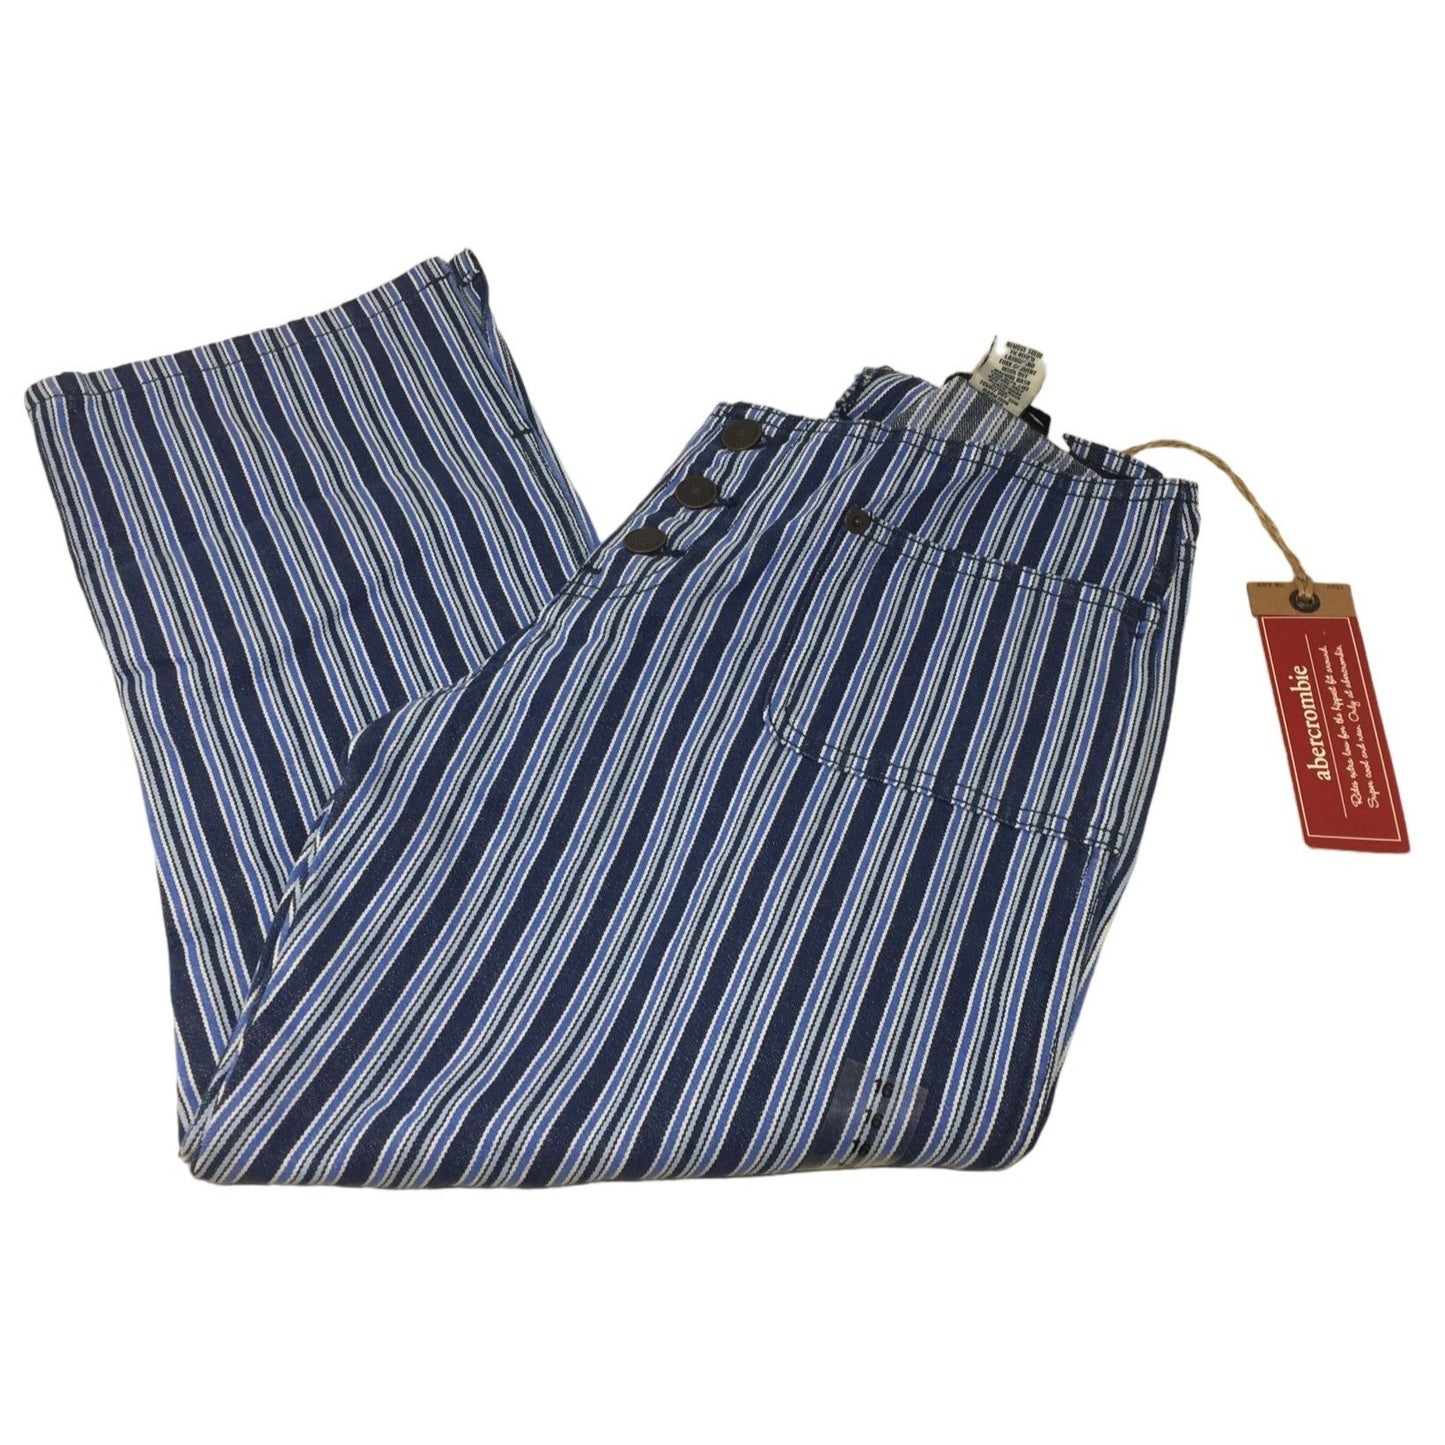 Abercrombie Women's Size 16 Striped Blue Super Low Rise Capri Pants New with Tags